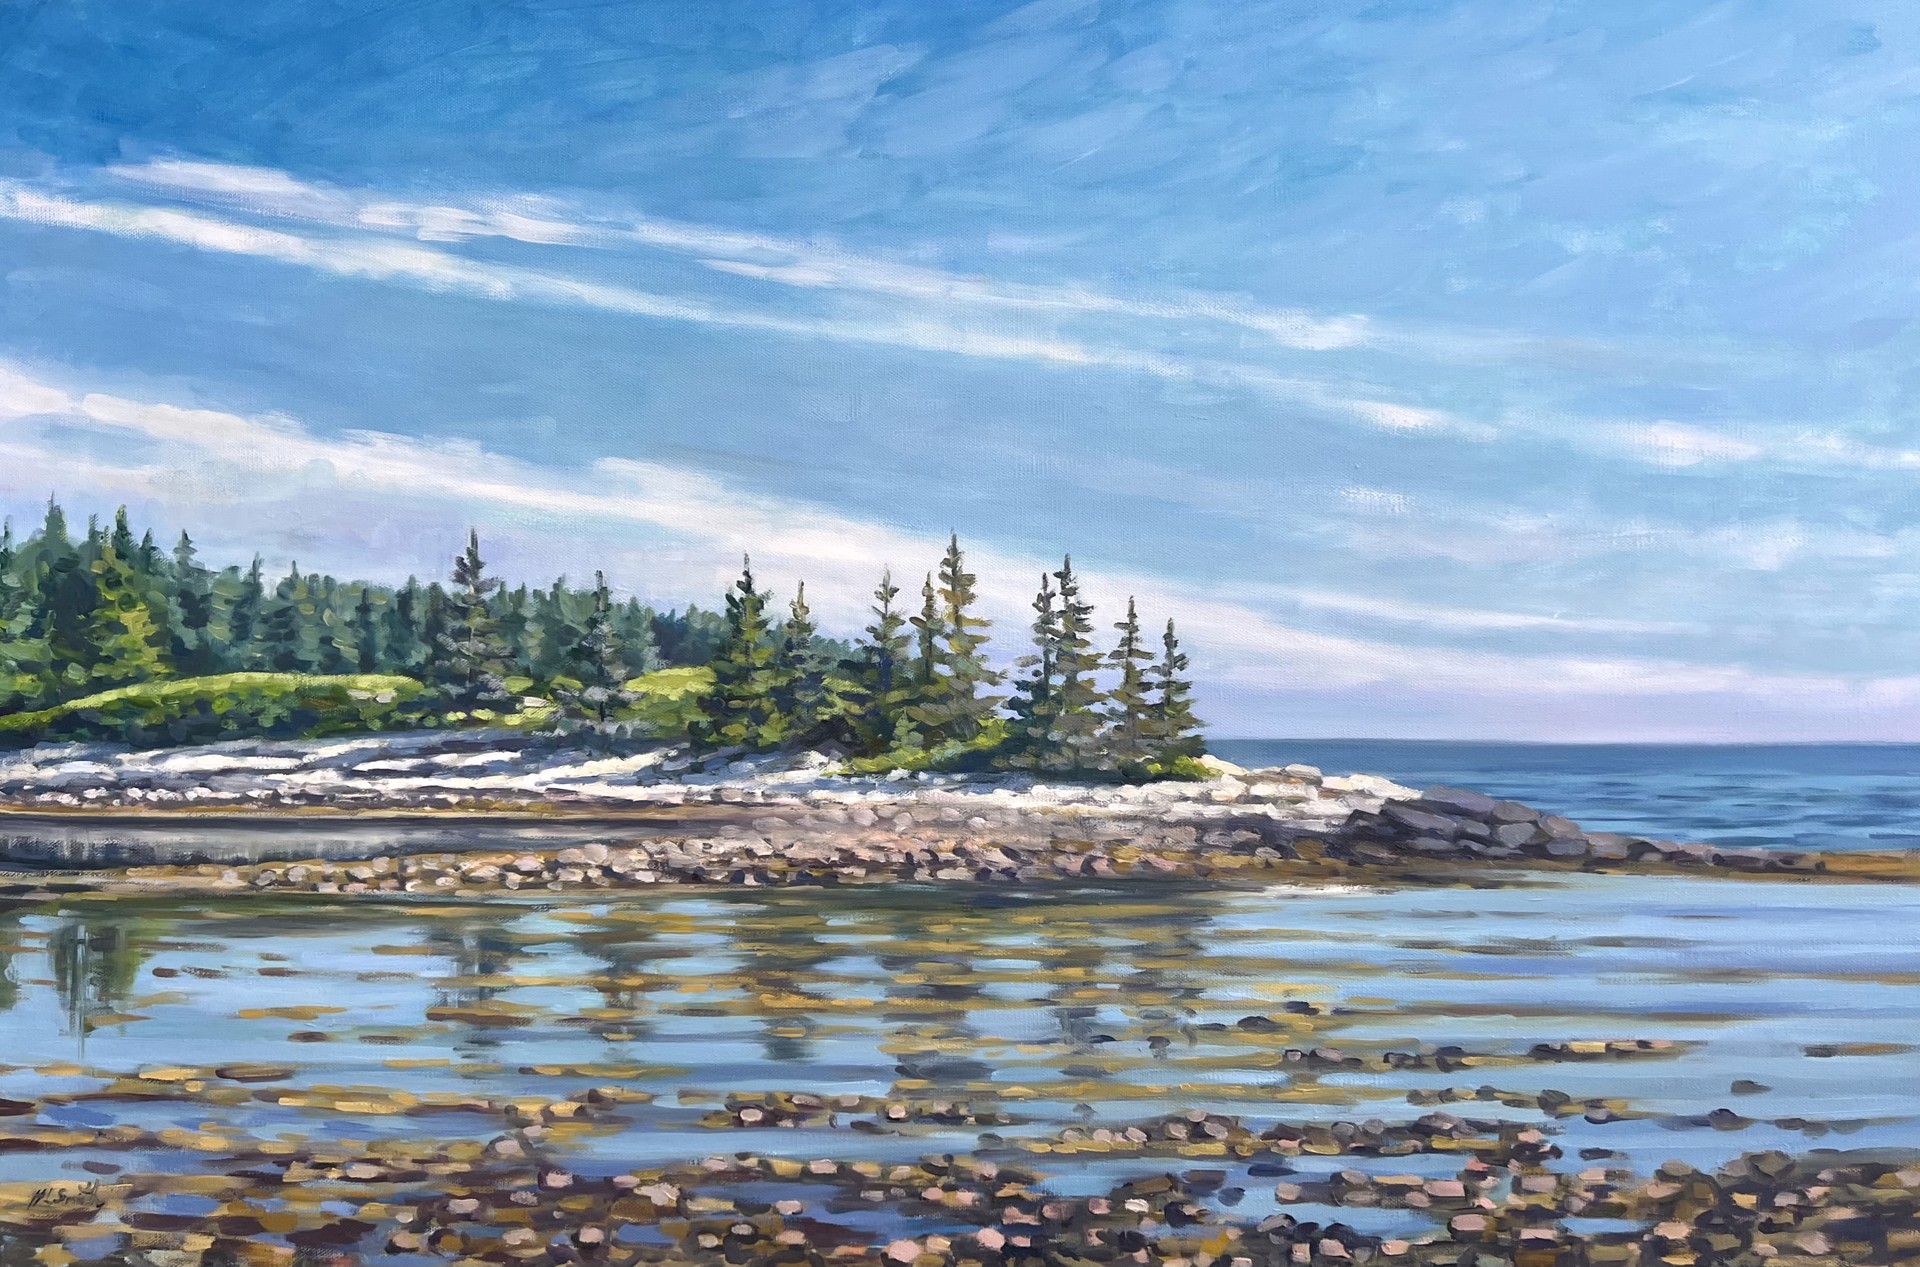 Acadia National Park by Holly L. Smith